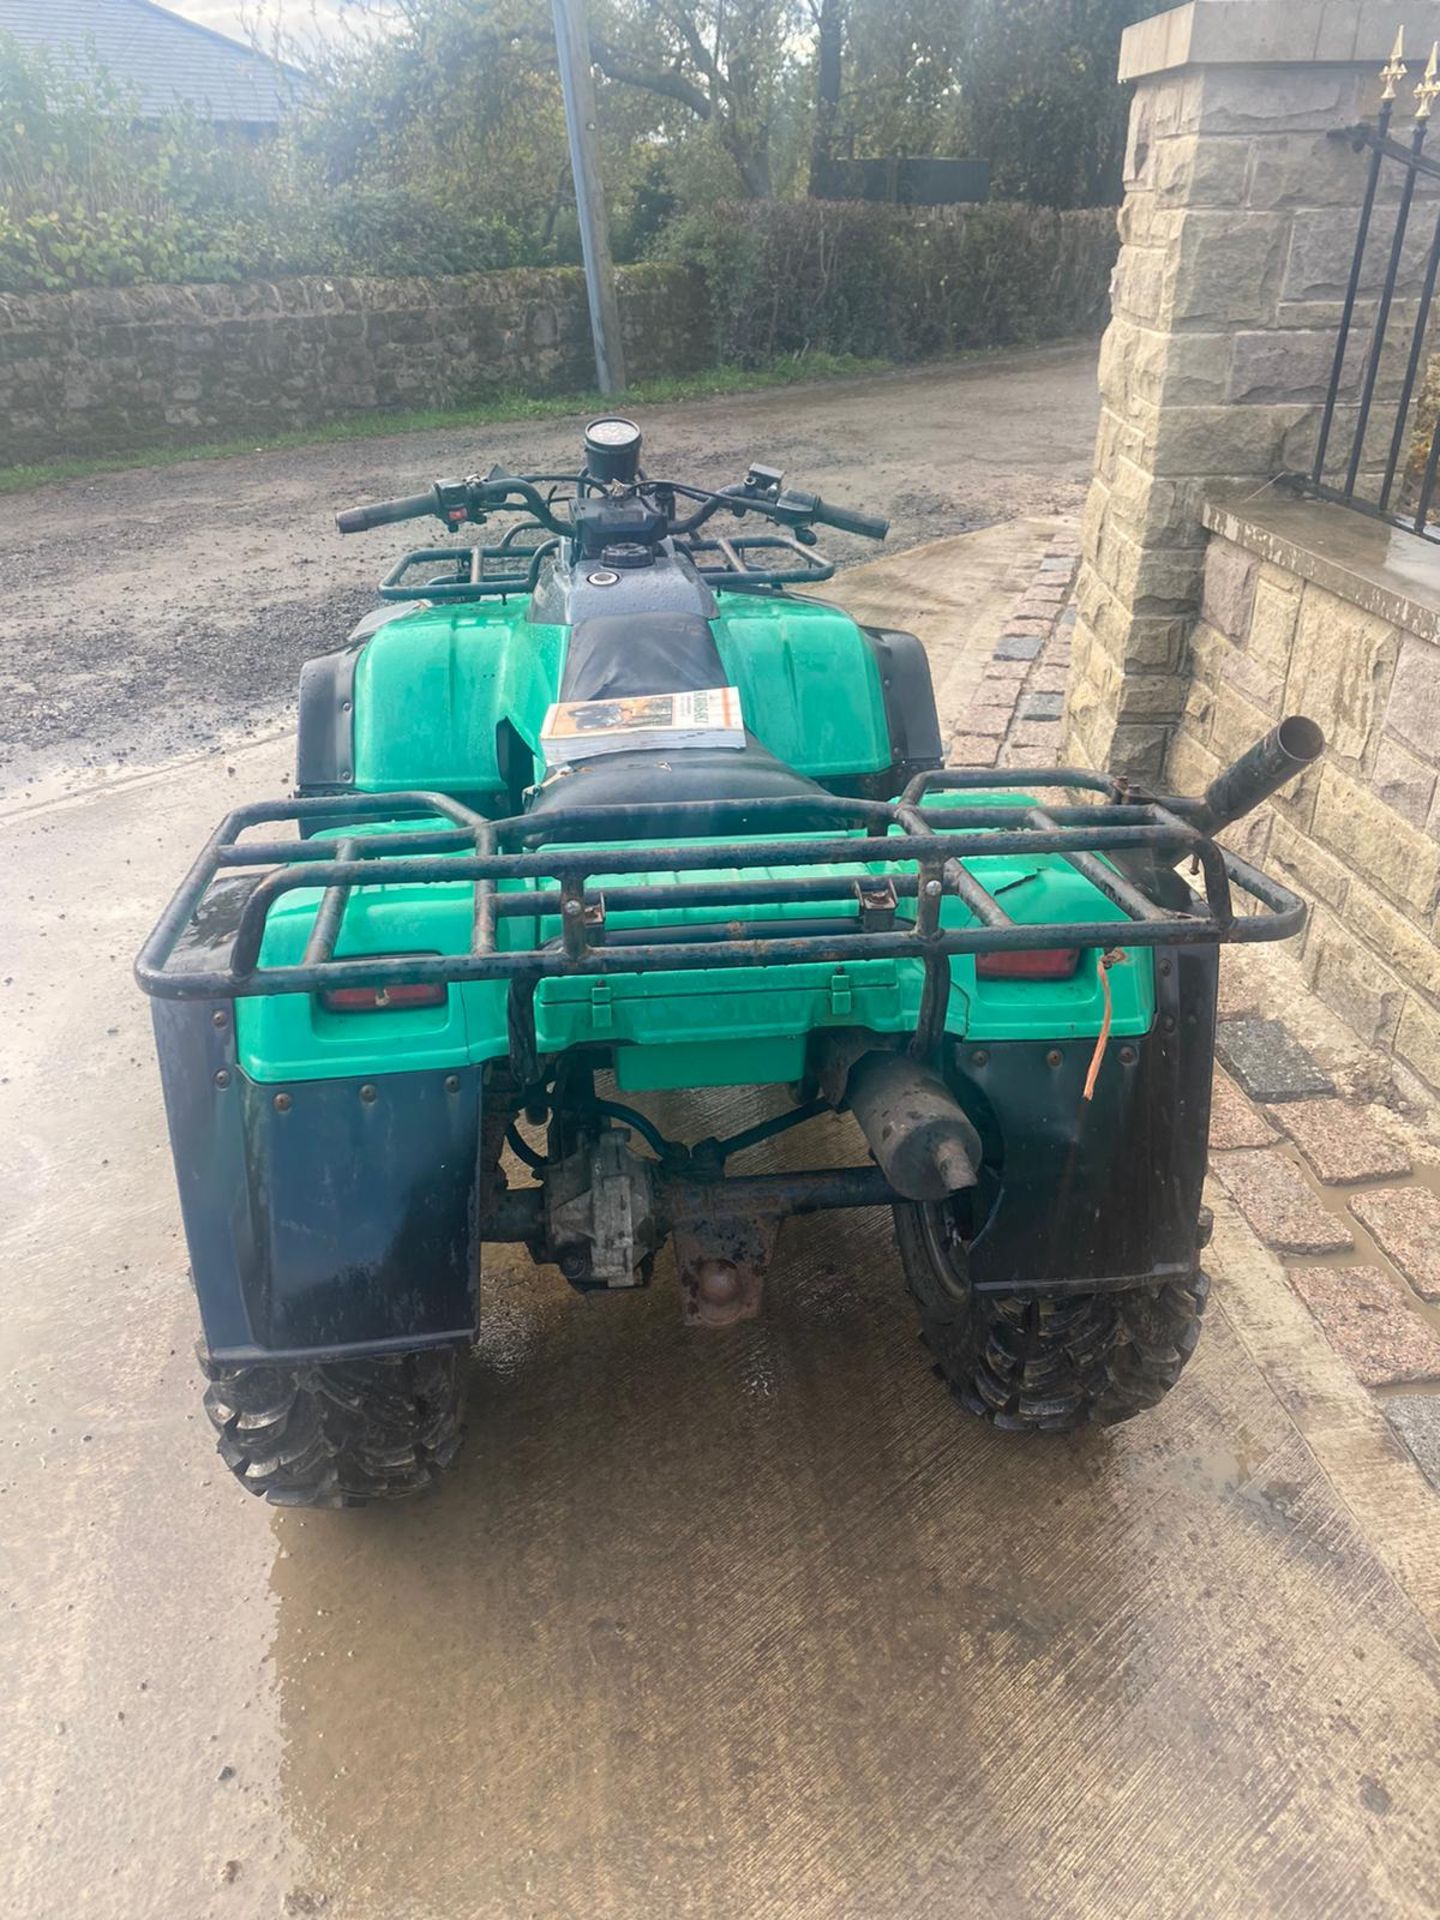 KAWASAKI KLF400 FARM QUAD, RUNS AND WORKS WELL, IN GOOD CONDITION *NO VAT* - Image 2 of 6